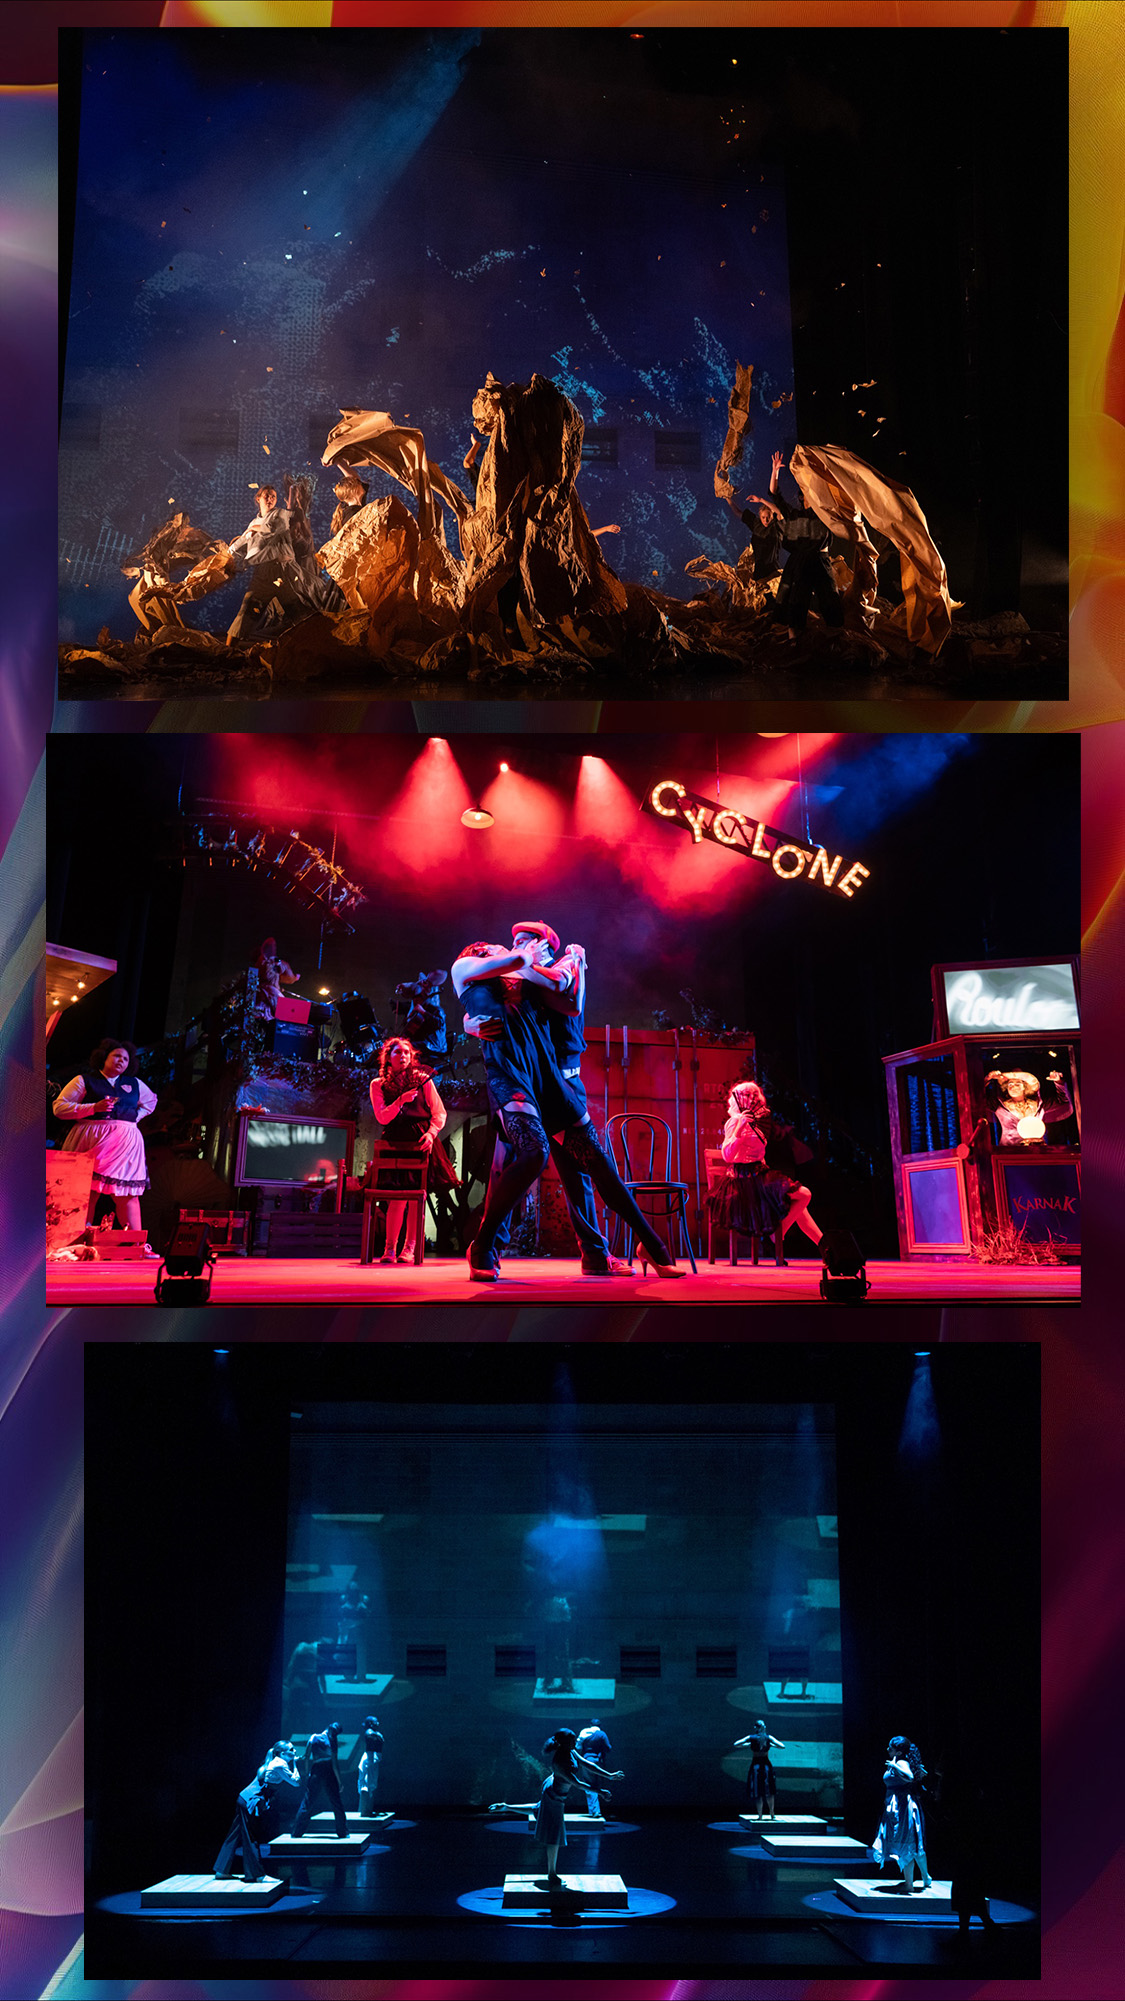 Three images on a multicolored field. The first image is of a dance peace with beautiful amber lighting catching the dancers bodies as they rip apart massive  paper in front of blue projections. The second image is of a musical set with actors lit in strong dynamic and primary red and blue light. The third image is of dancers in isolating blue downlight and live feed of the dancers projected onto the wall behind them. 